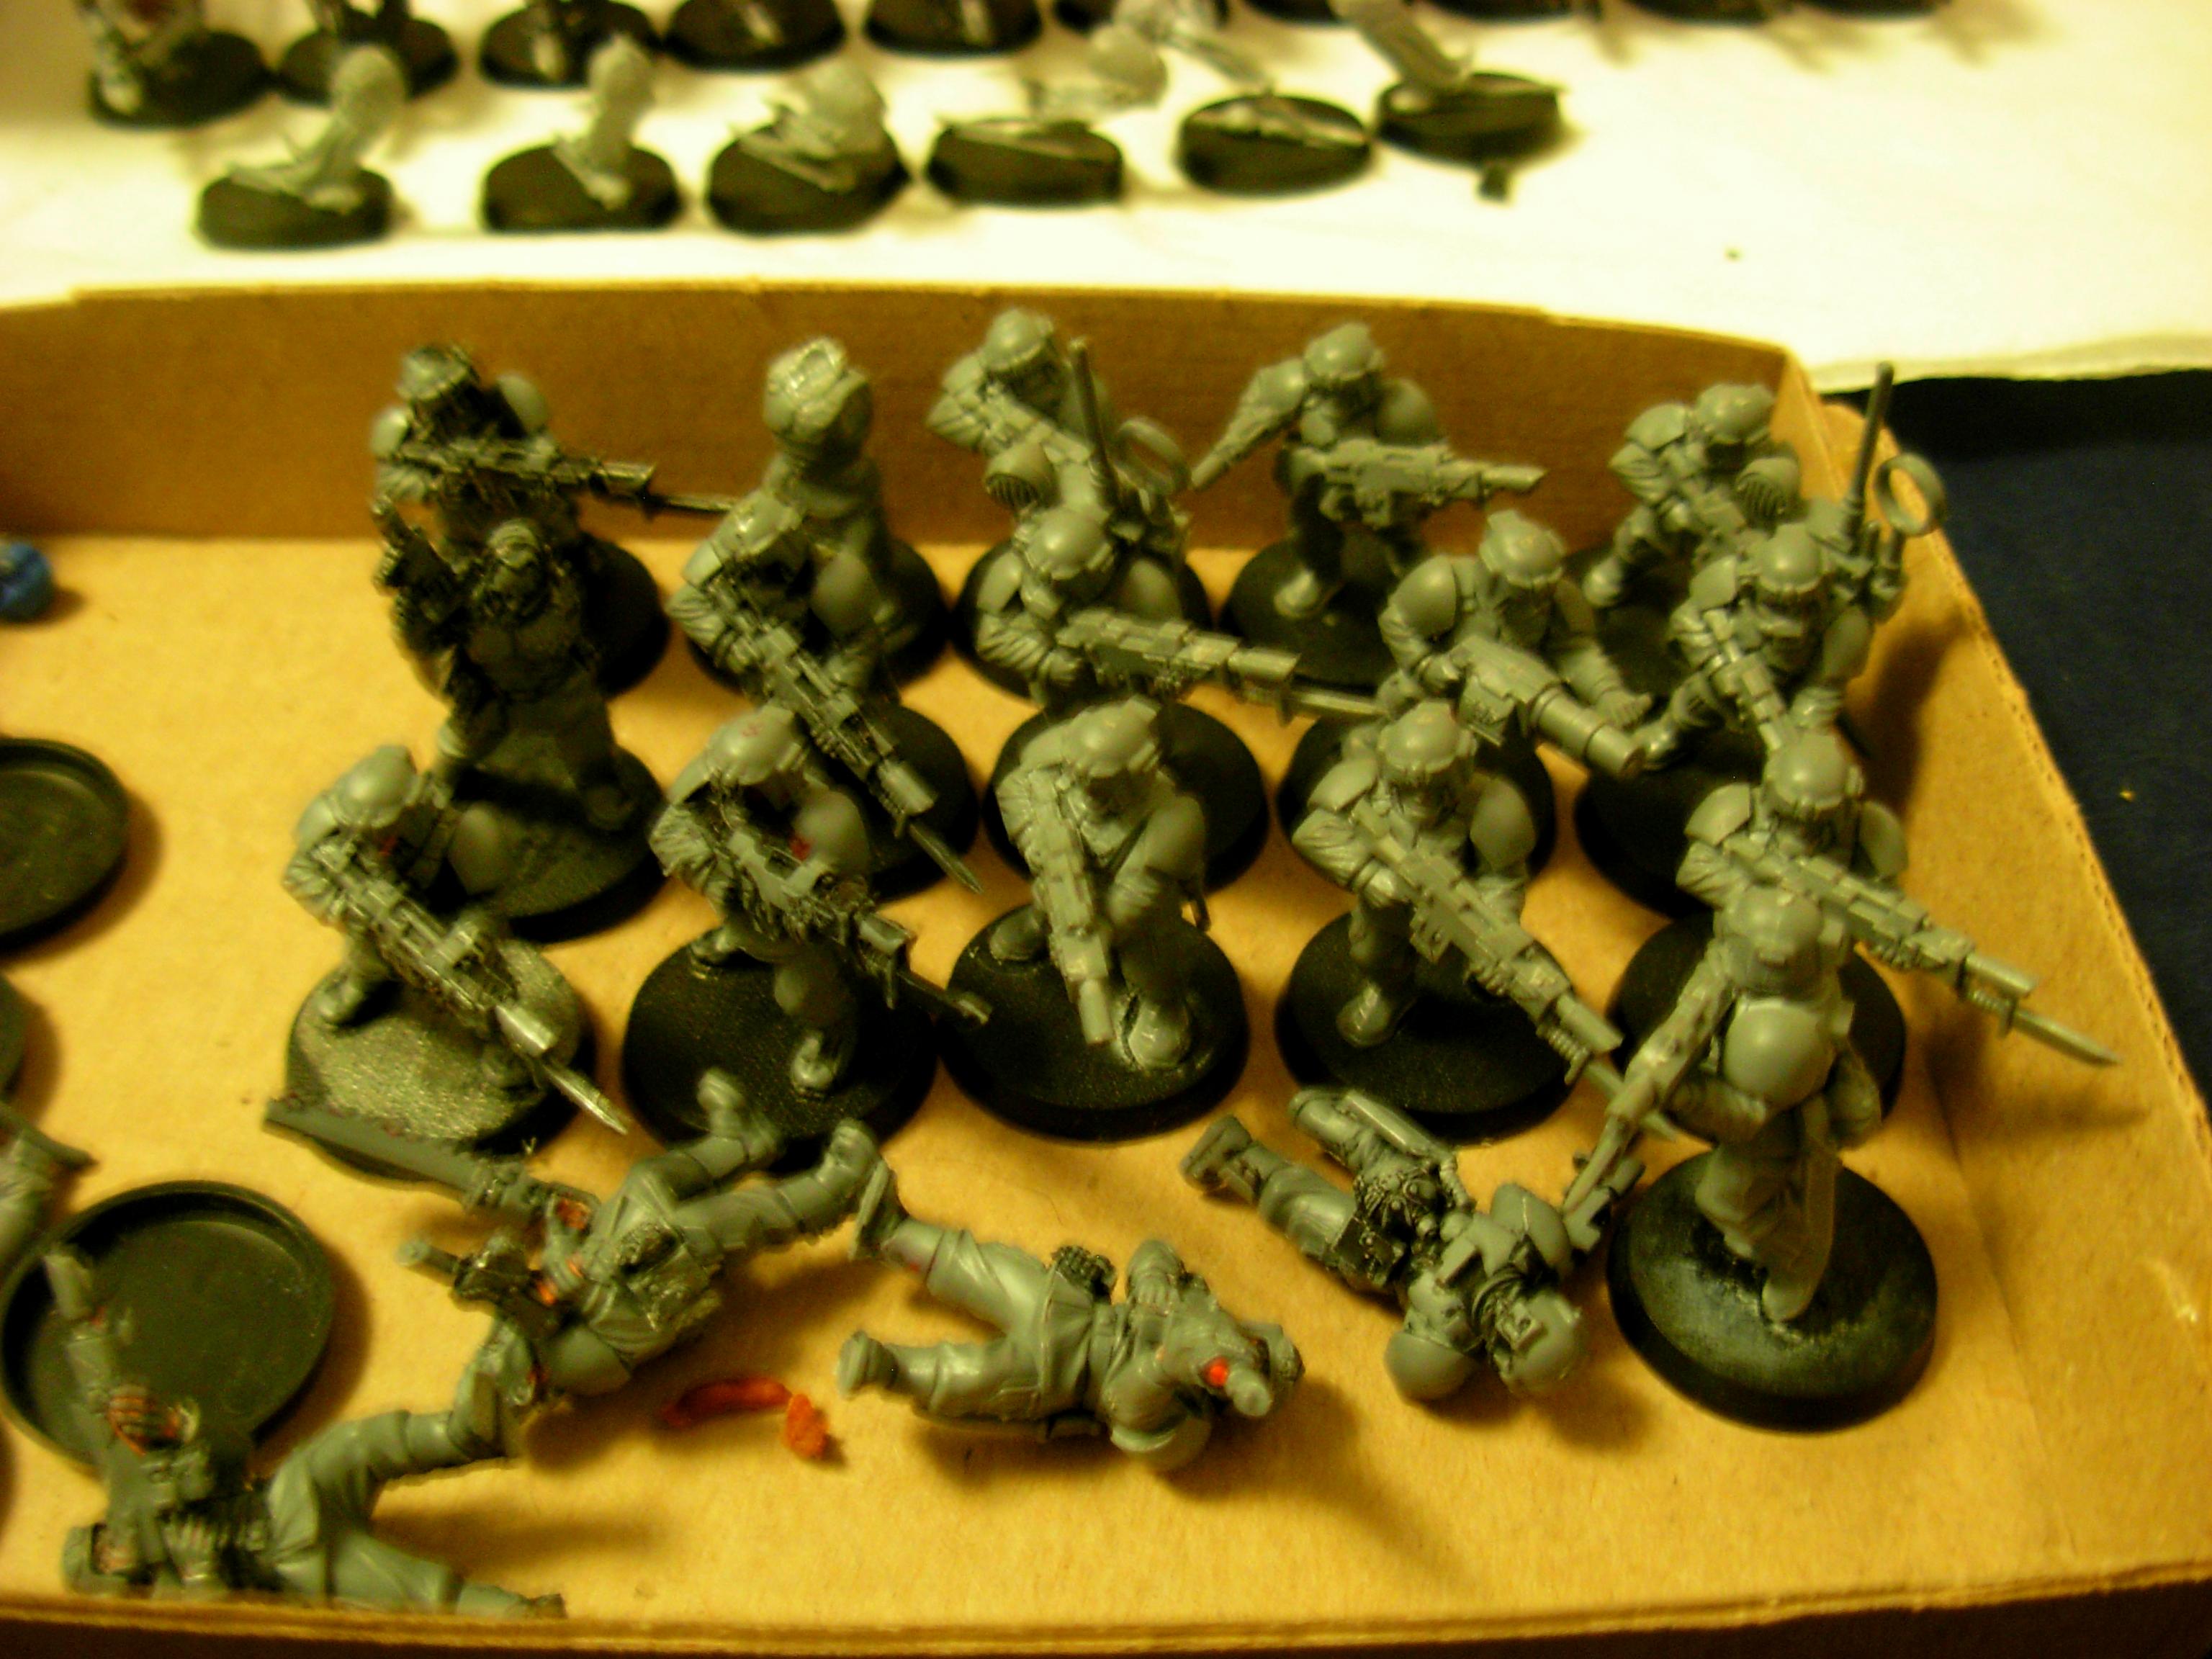 Imperial guard lot